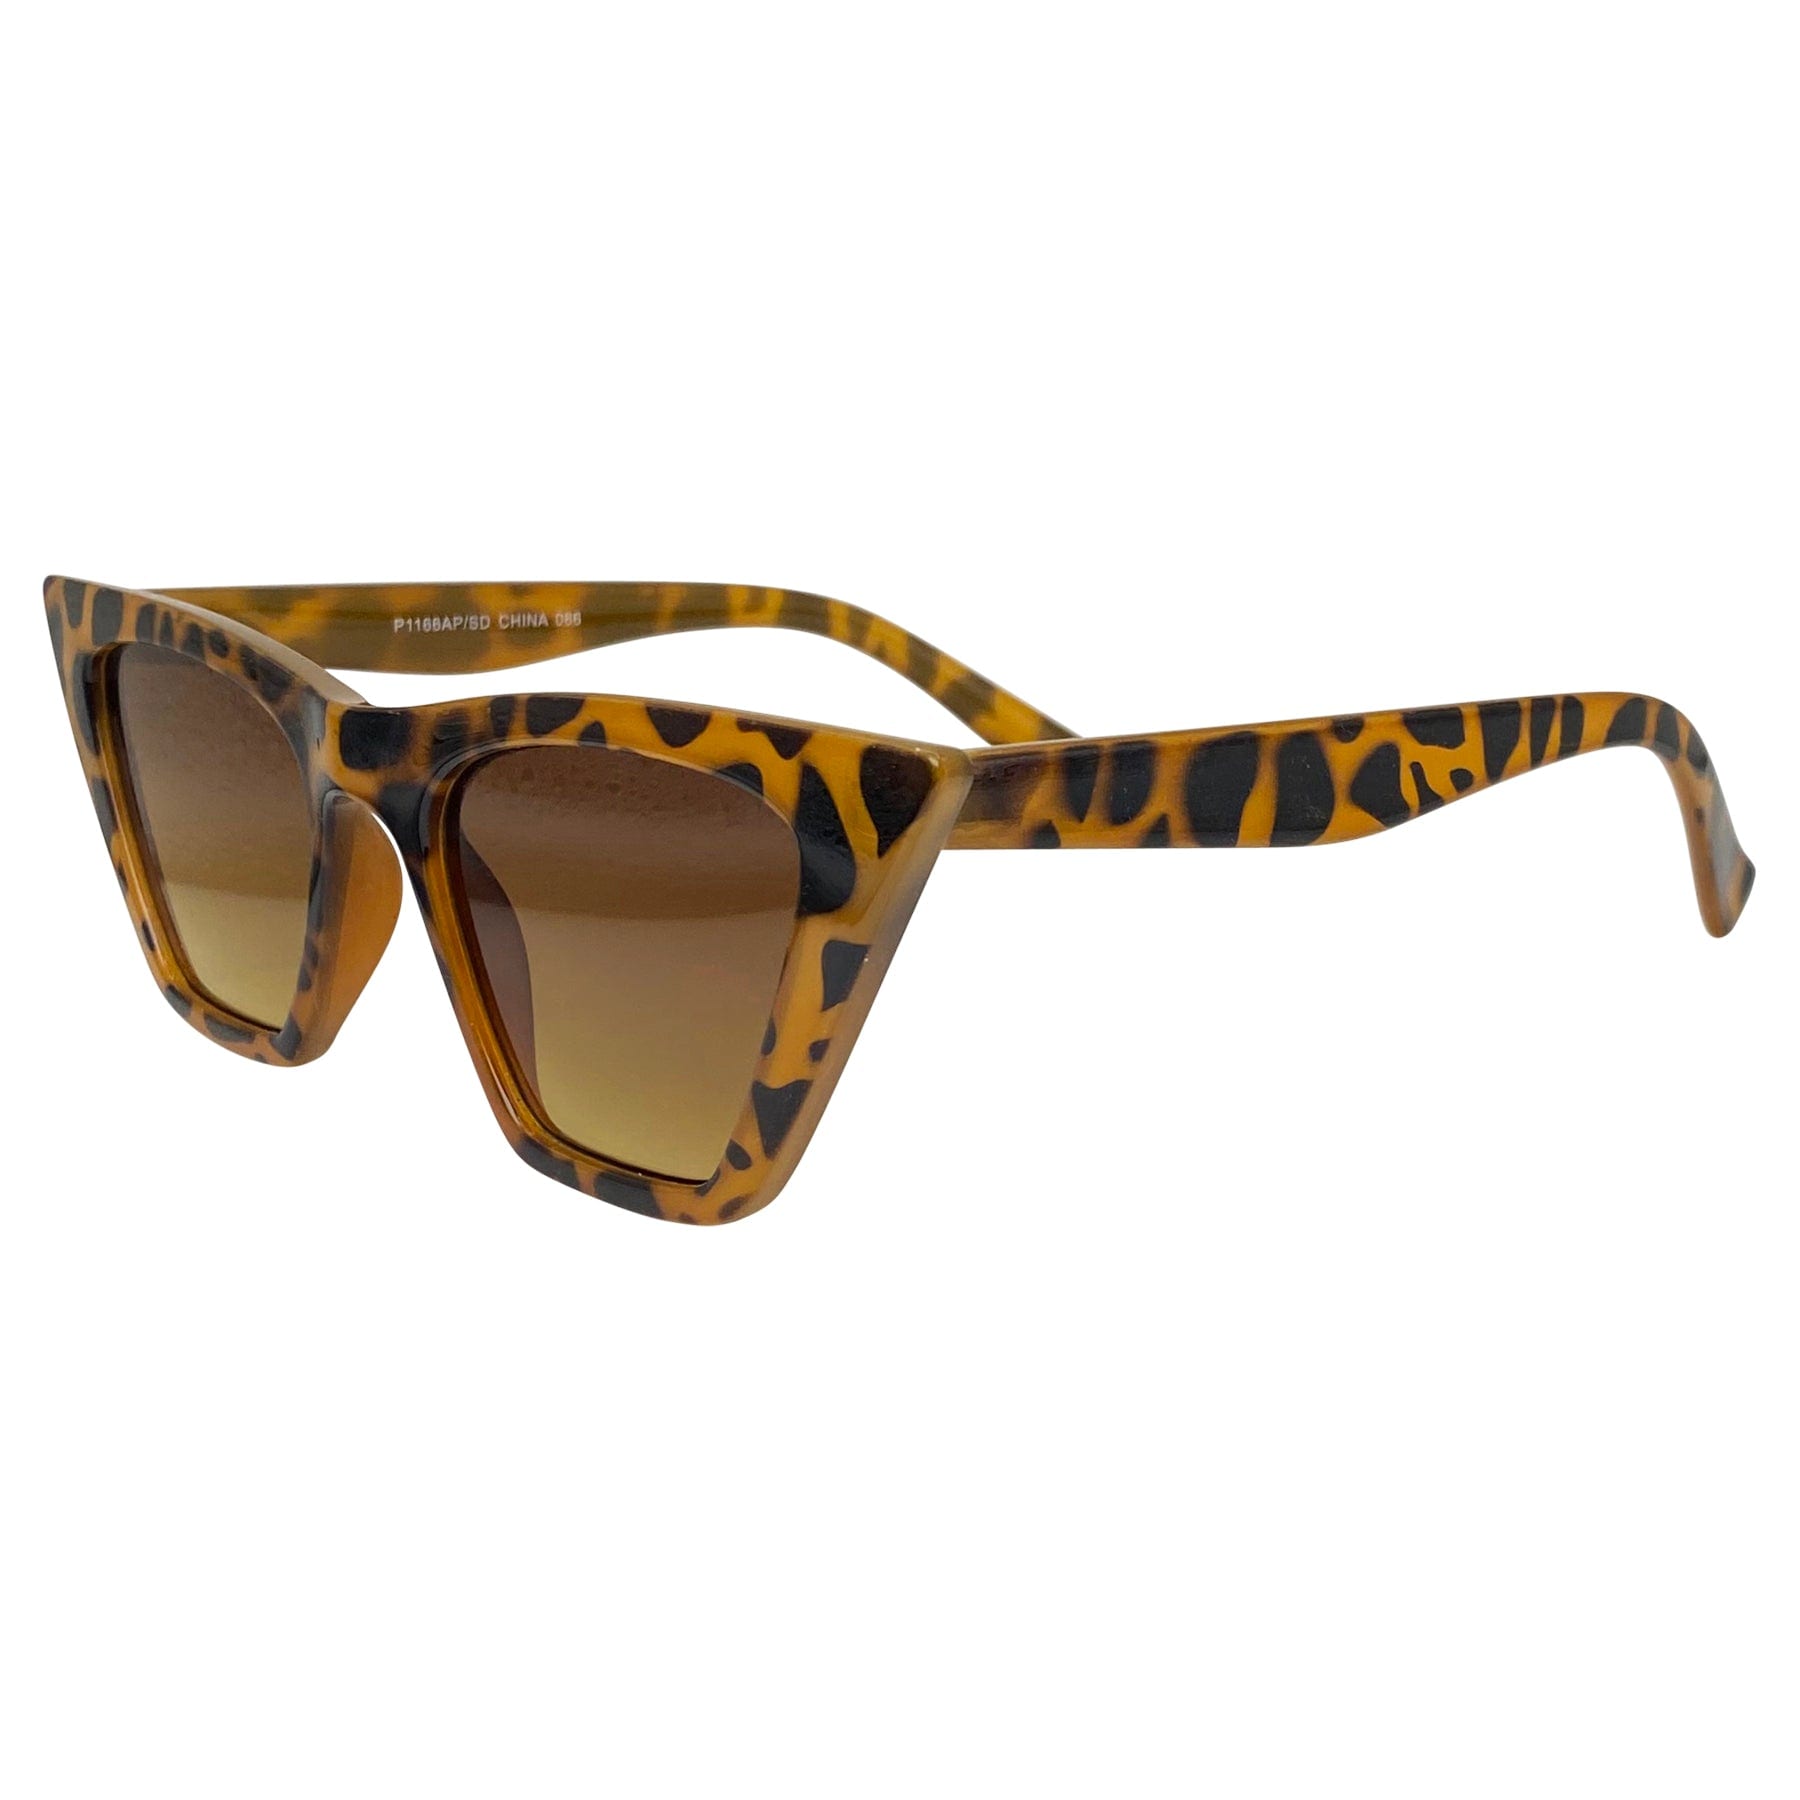 unique animal print vintage frames with an angled cat eye shape